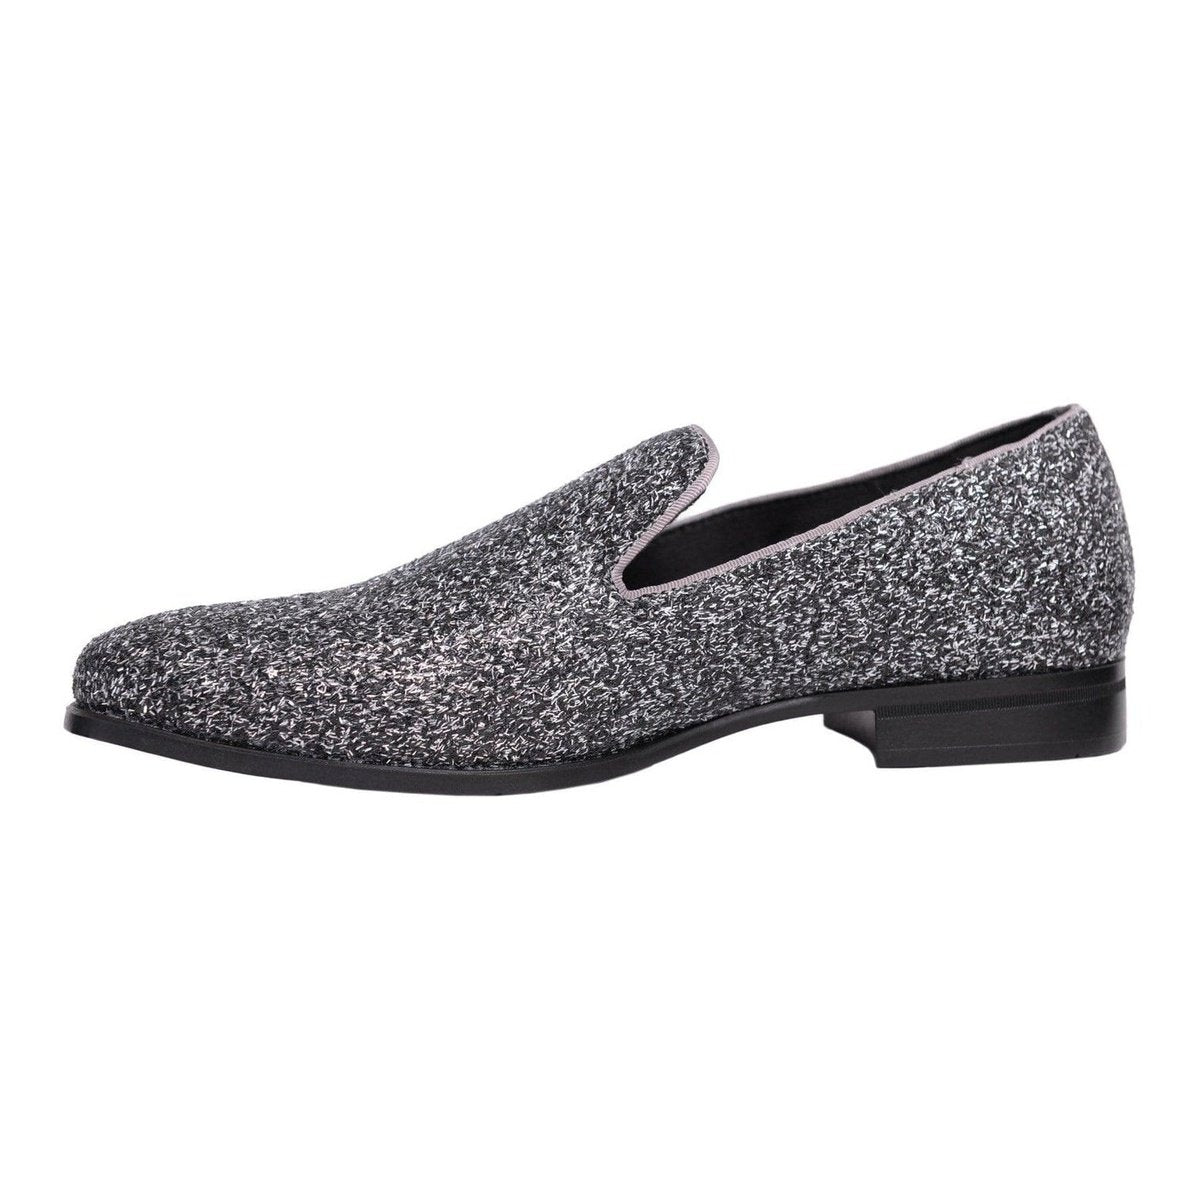 Silver Glitters Sparkles Mens Oxfords Loafers Dress Shoes Flats